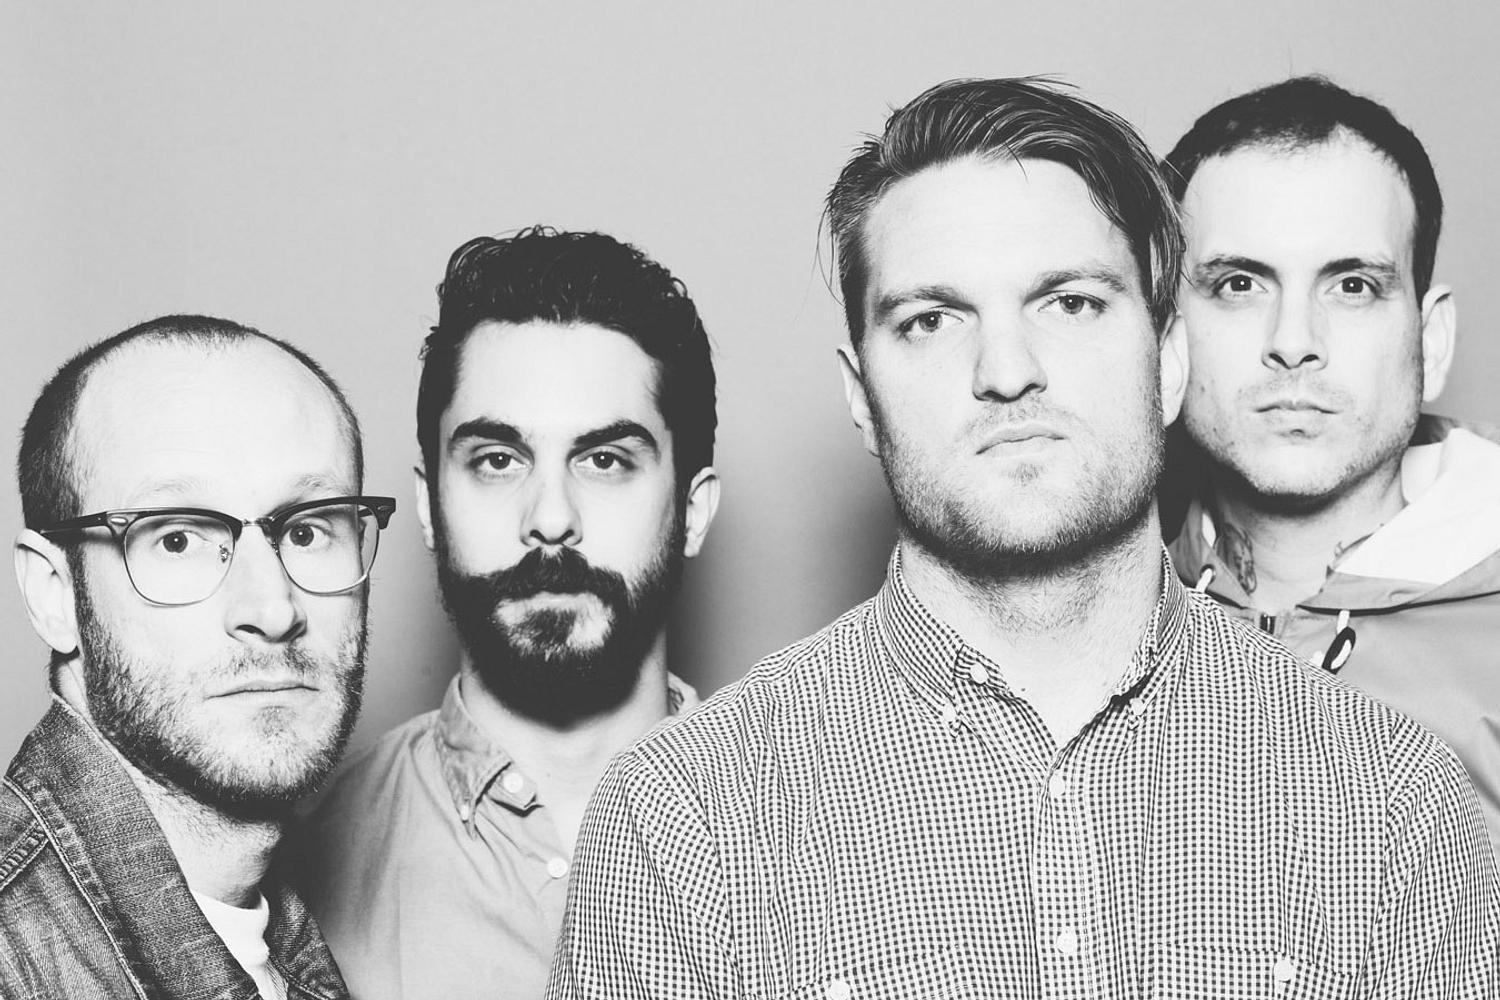 Cold War Kids stream new single, ‘All This Could Be Yours’